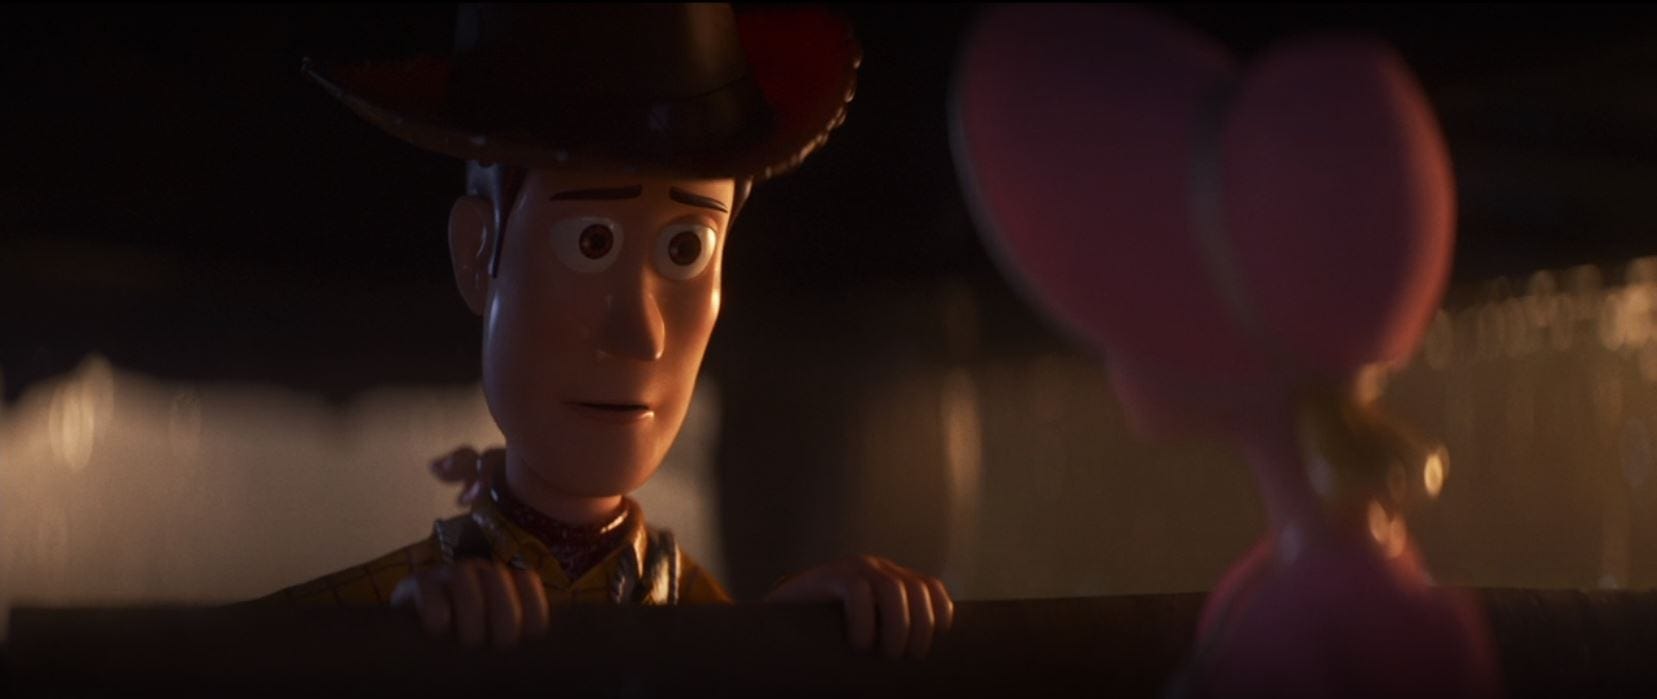 How Toy Story 3 Ended - Recap Summary Of New Kid Bonnie